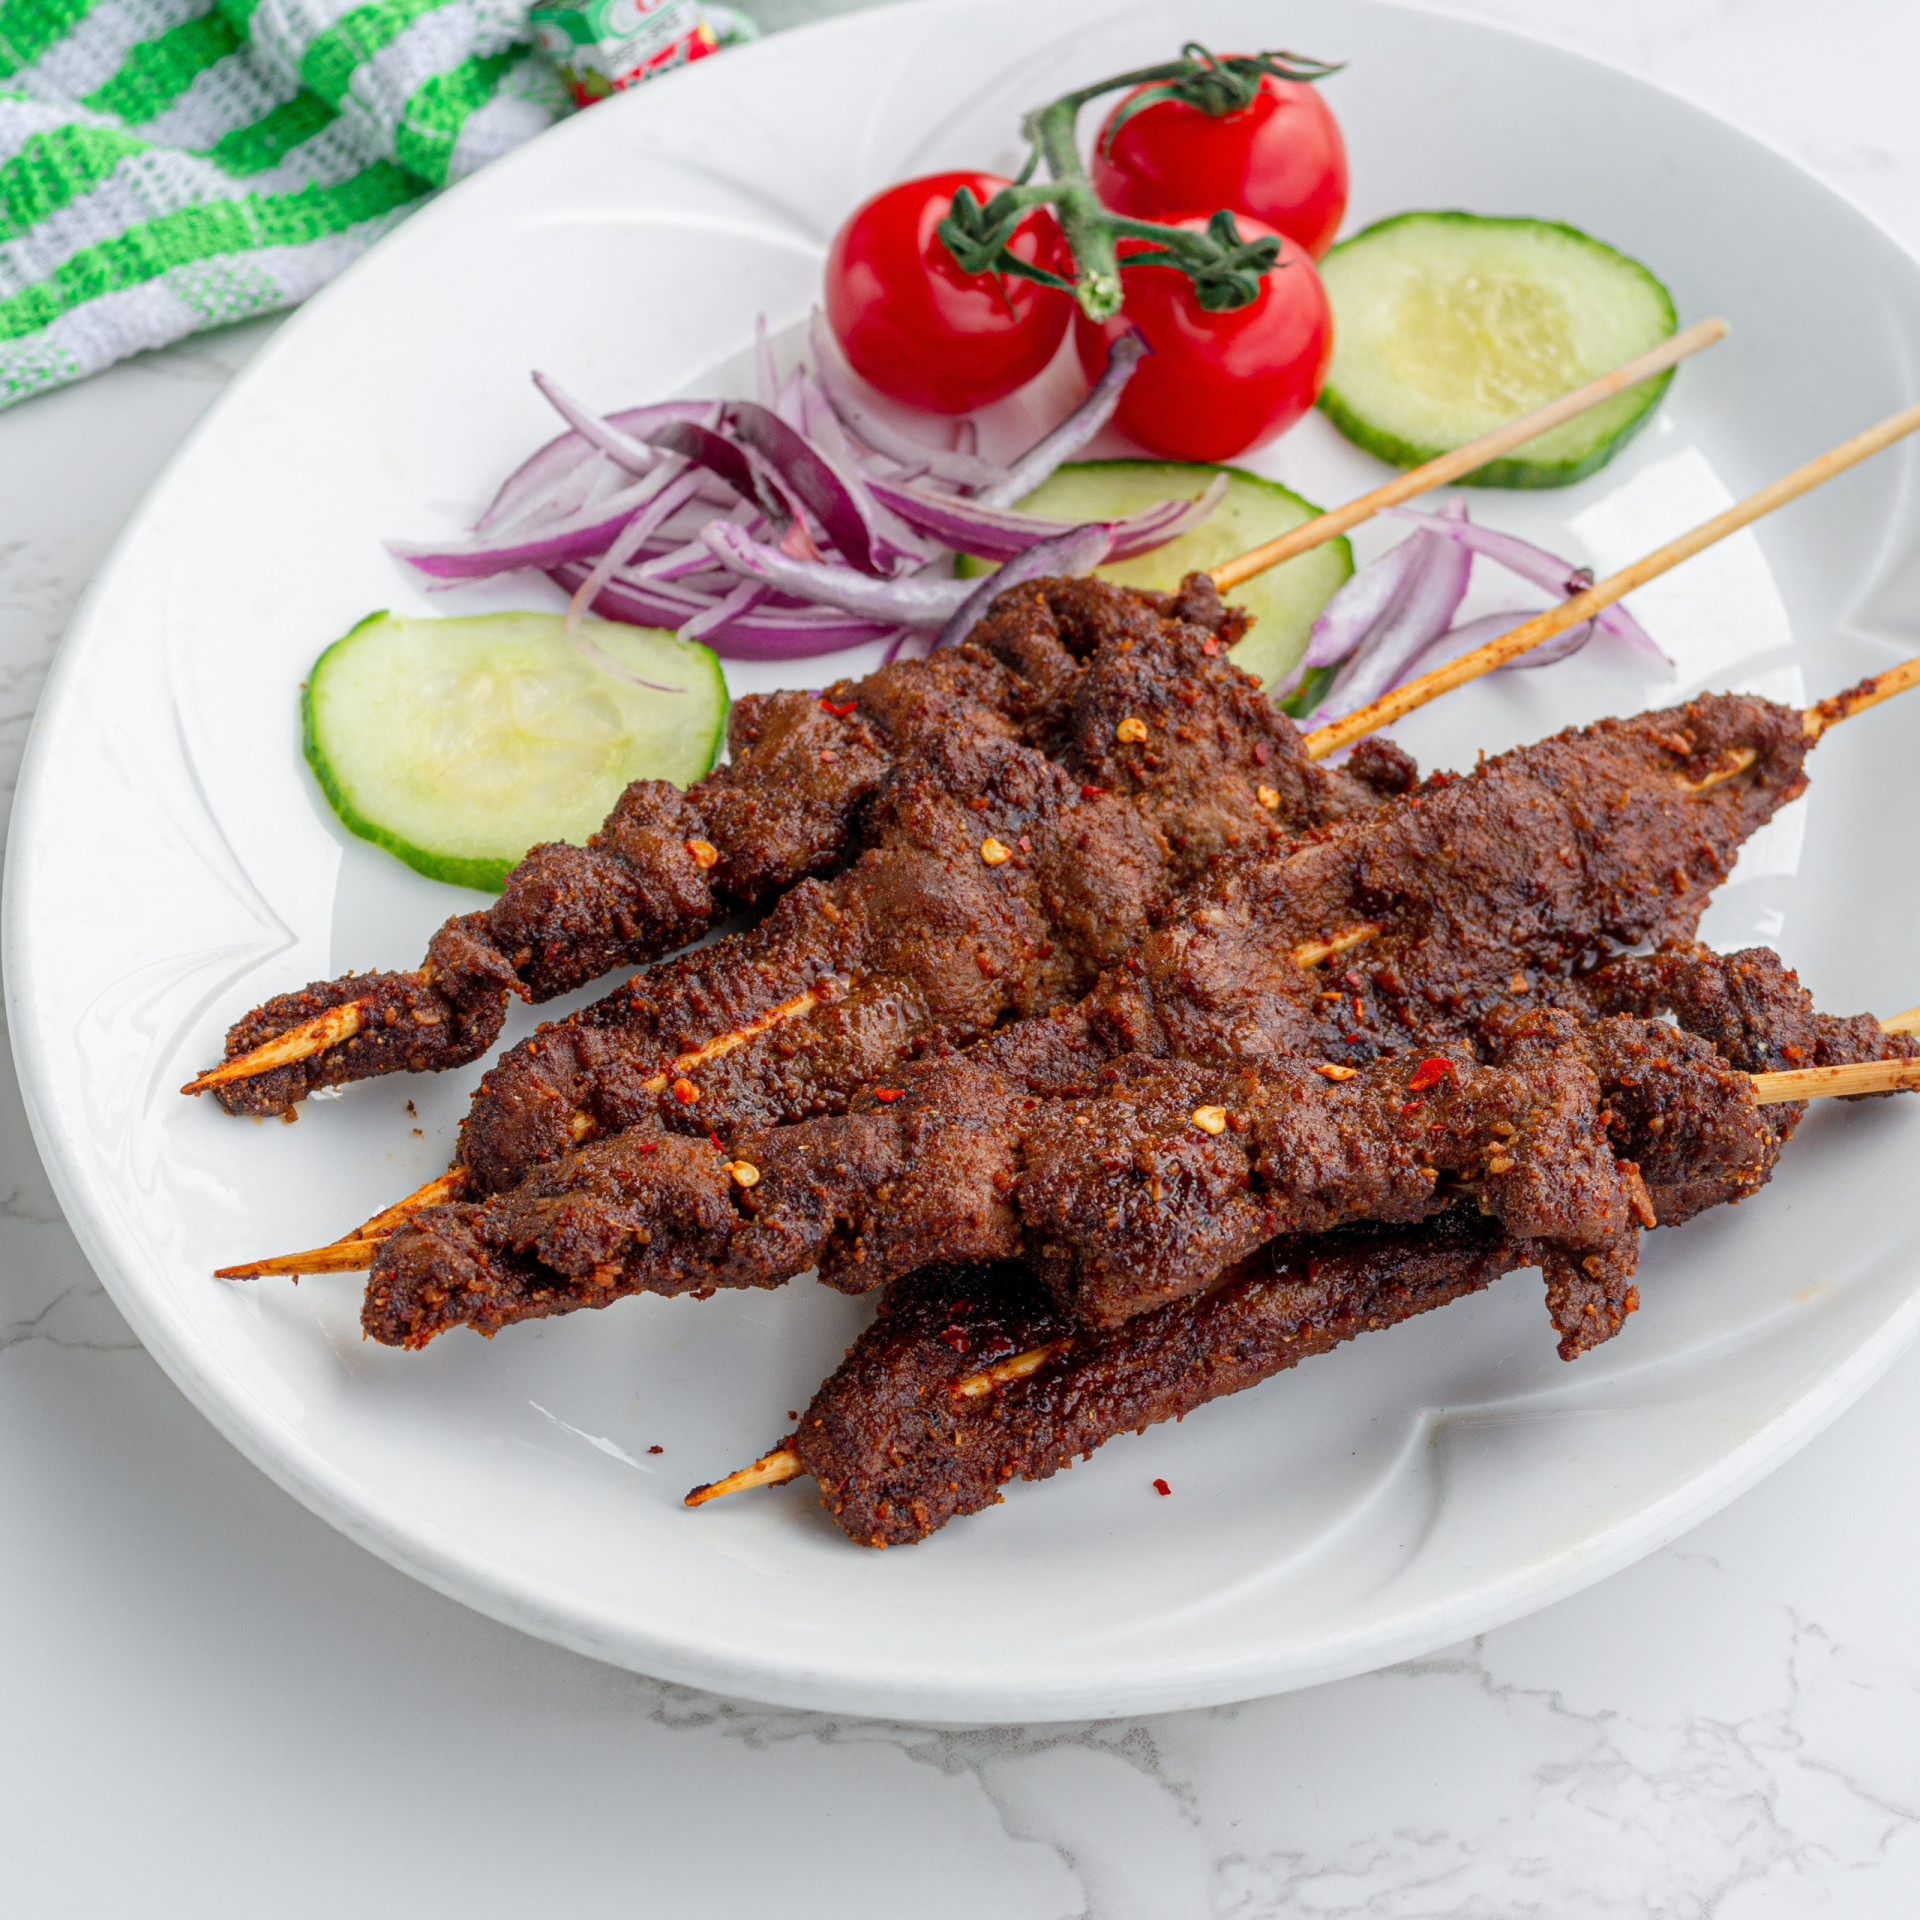 <p><span>A traditional Nigerian street food, Suya is grilled skewered beef, ram, or chicken marinated in a spicy peanut sauce.</span></p><p><a href="https://www.msn.com/en-us/community/channel/vid-7xx8mnucu55yw63we9va2gwr7uihbxwc68fxqp25x6tg4ftibpra?cvid=94631541bc0f4f89bfd59158d696ad7e">Follow us and access great exclusive content every day</a></p>